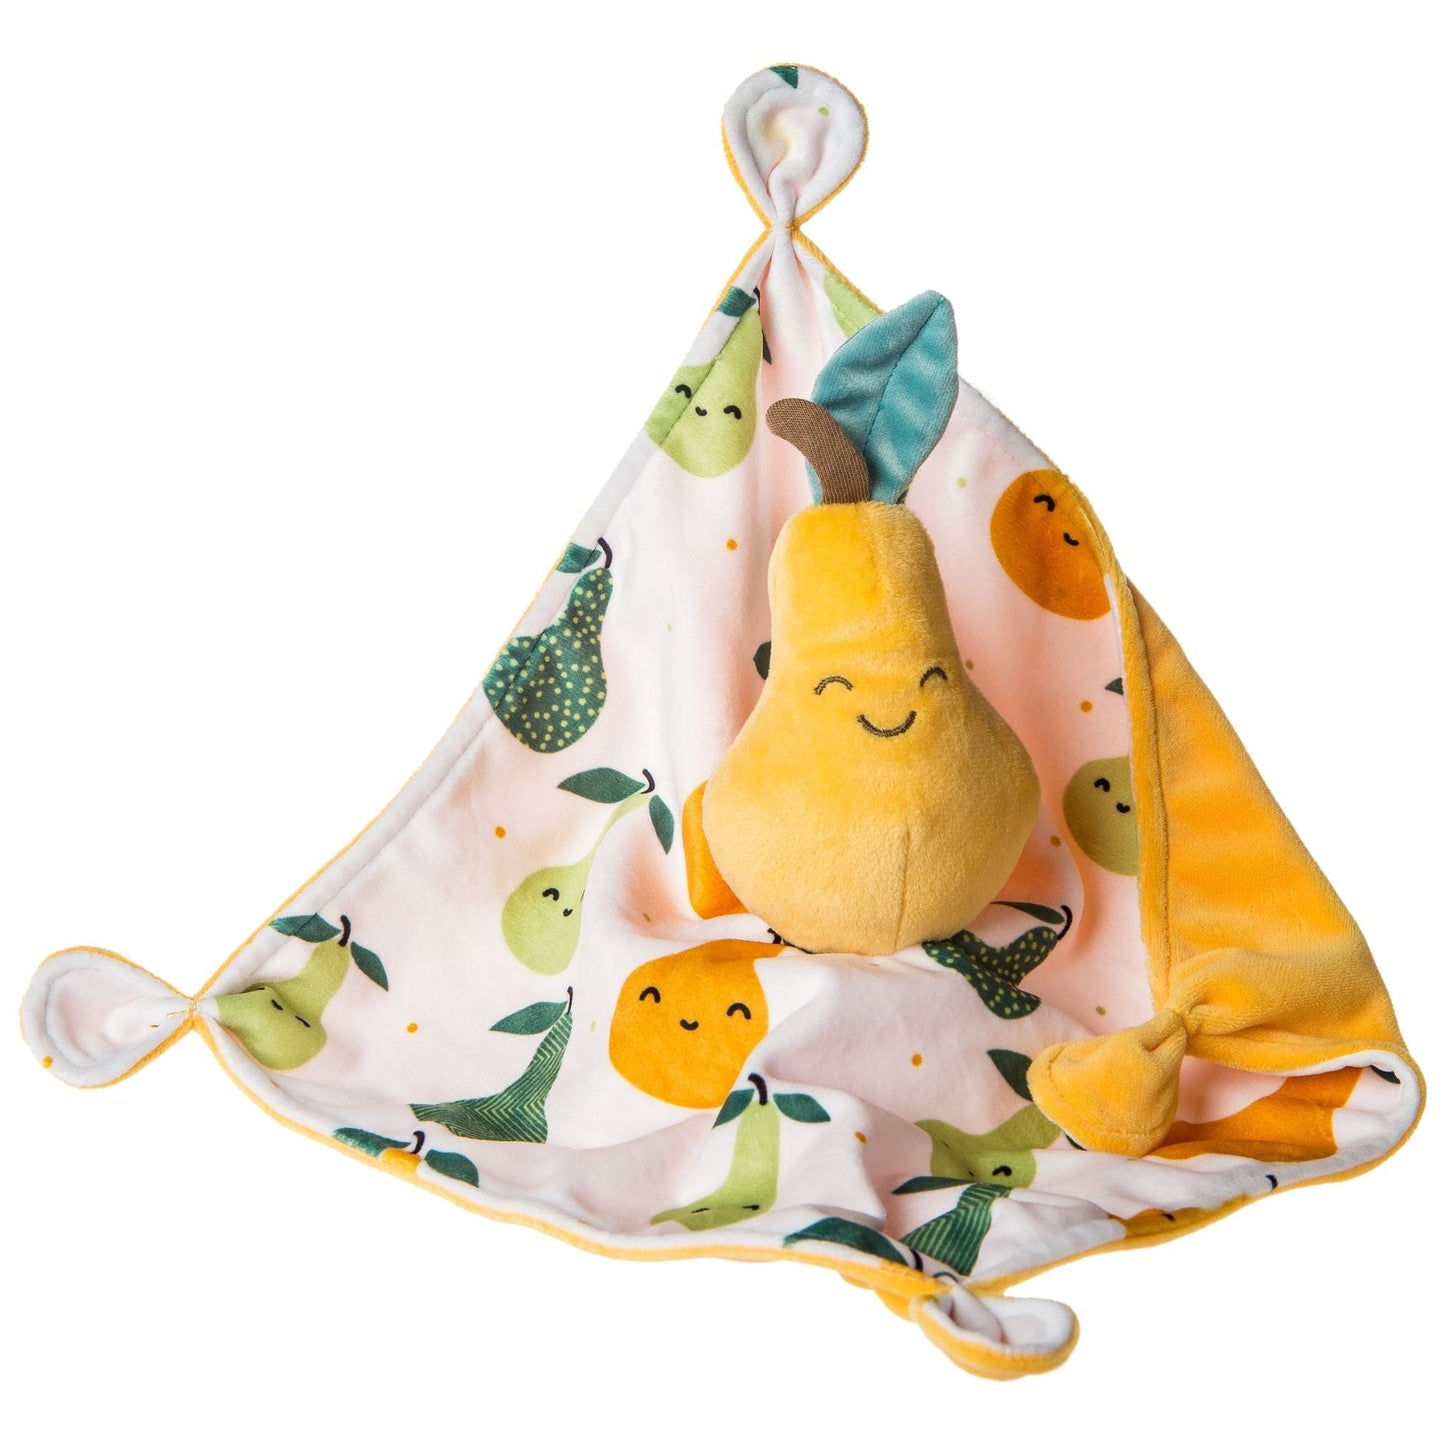 Mary Meyer Sweet Pear Soothie Lovey Security Blanket